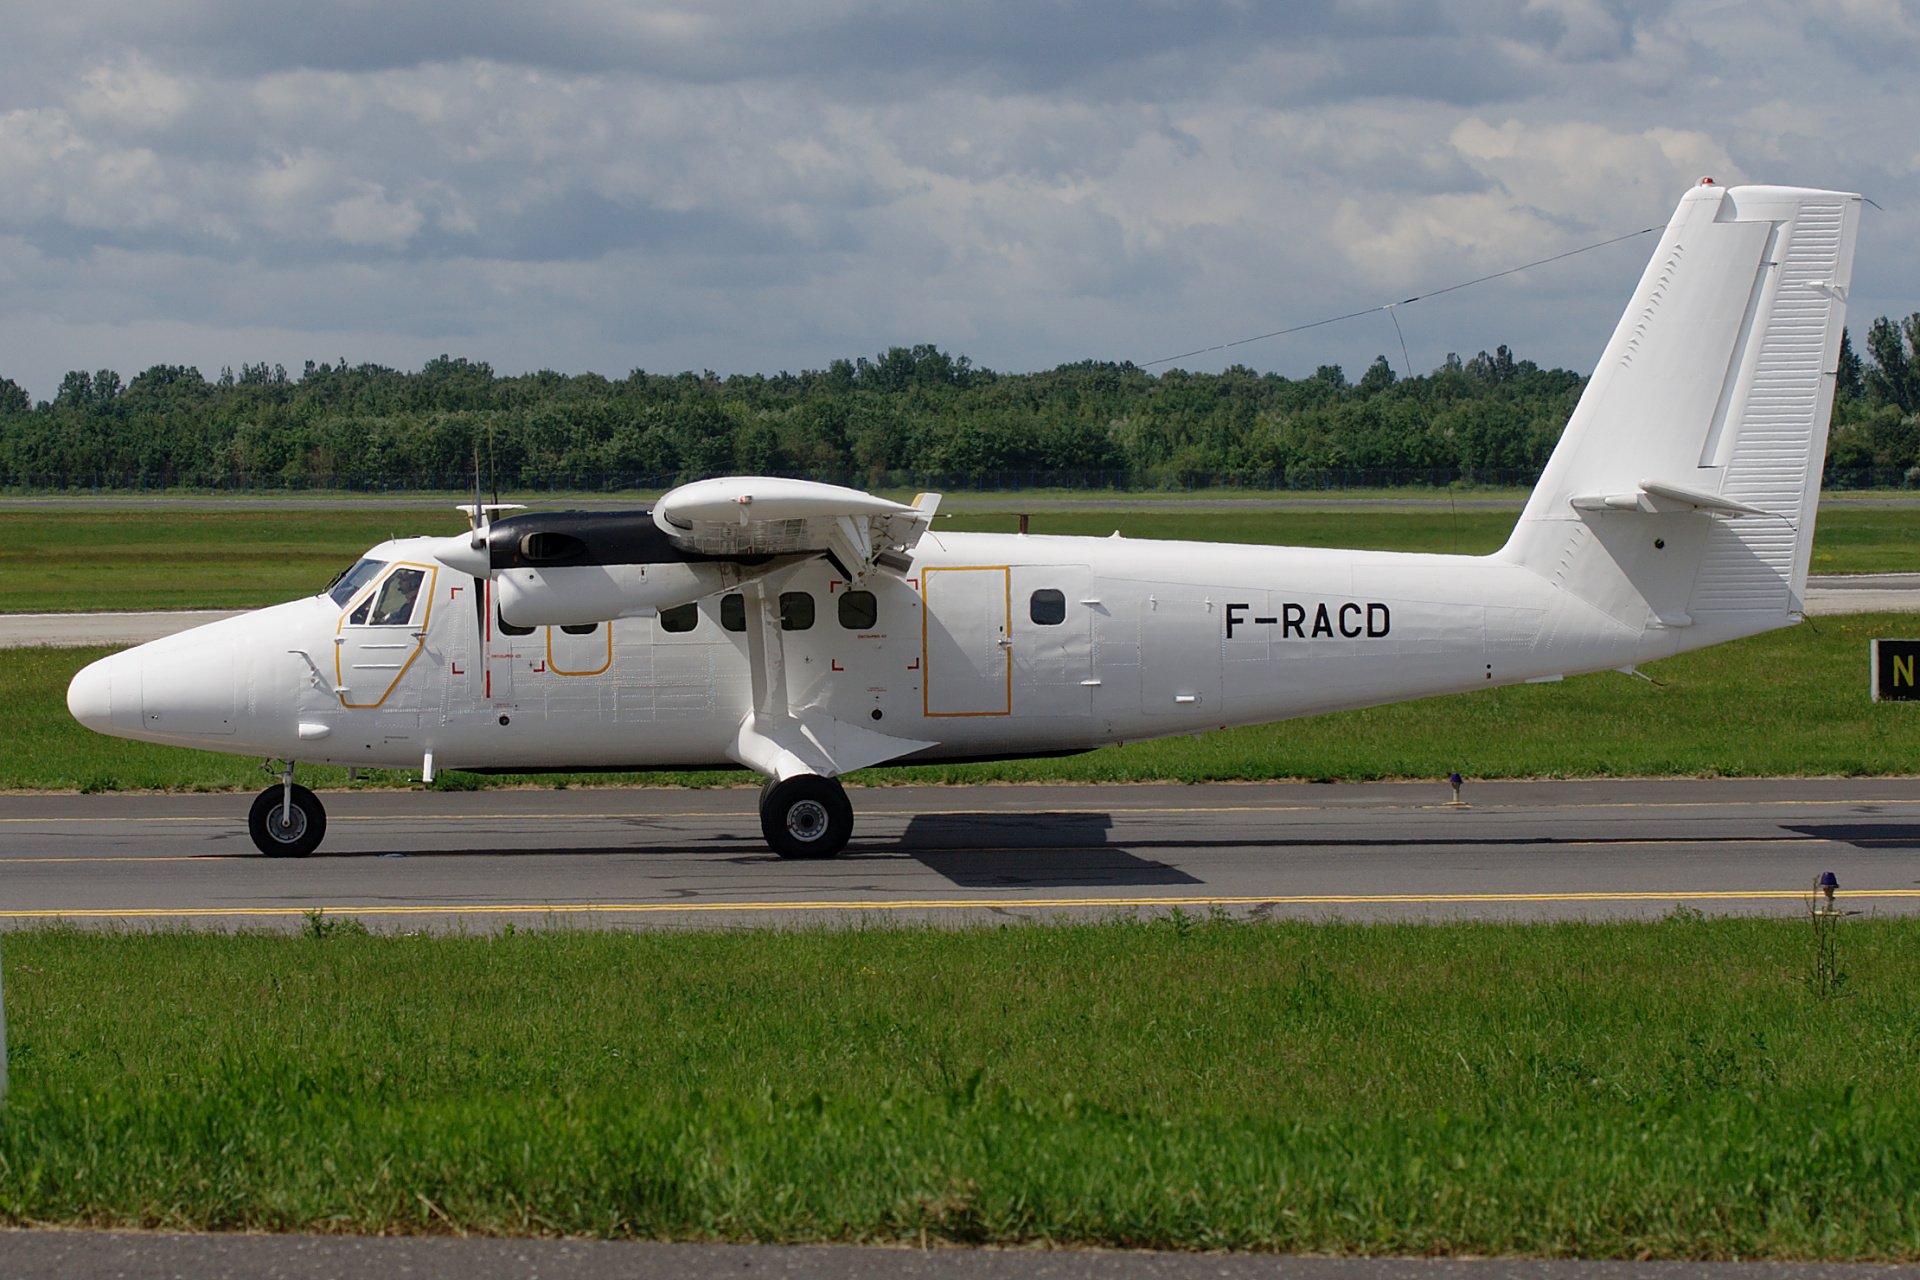 F-RACD, French Air Force (Aircraft » EPWA Spotting » De Havilland Canada DHC-6 Twin Otter)